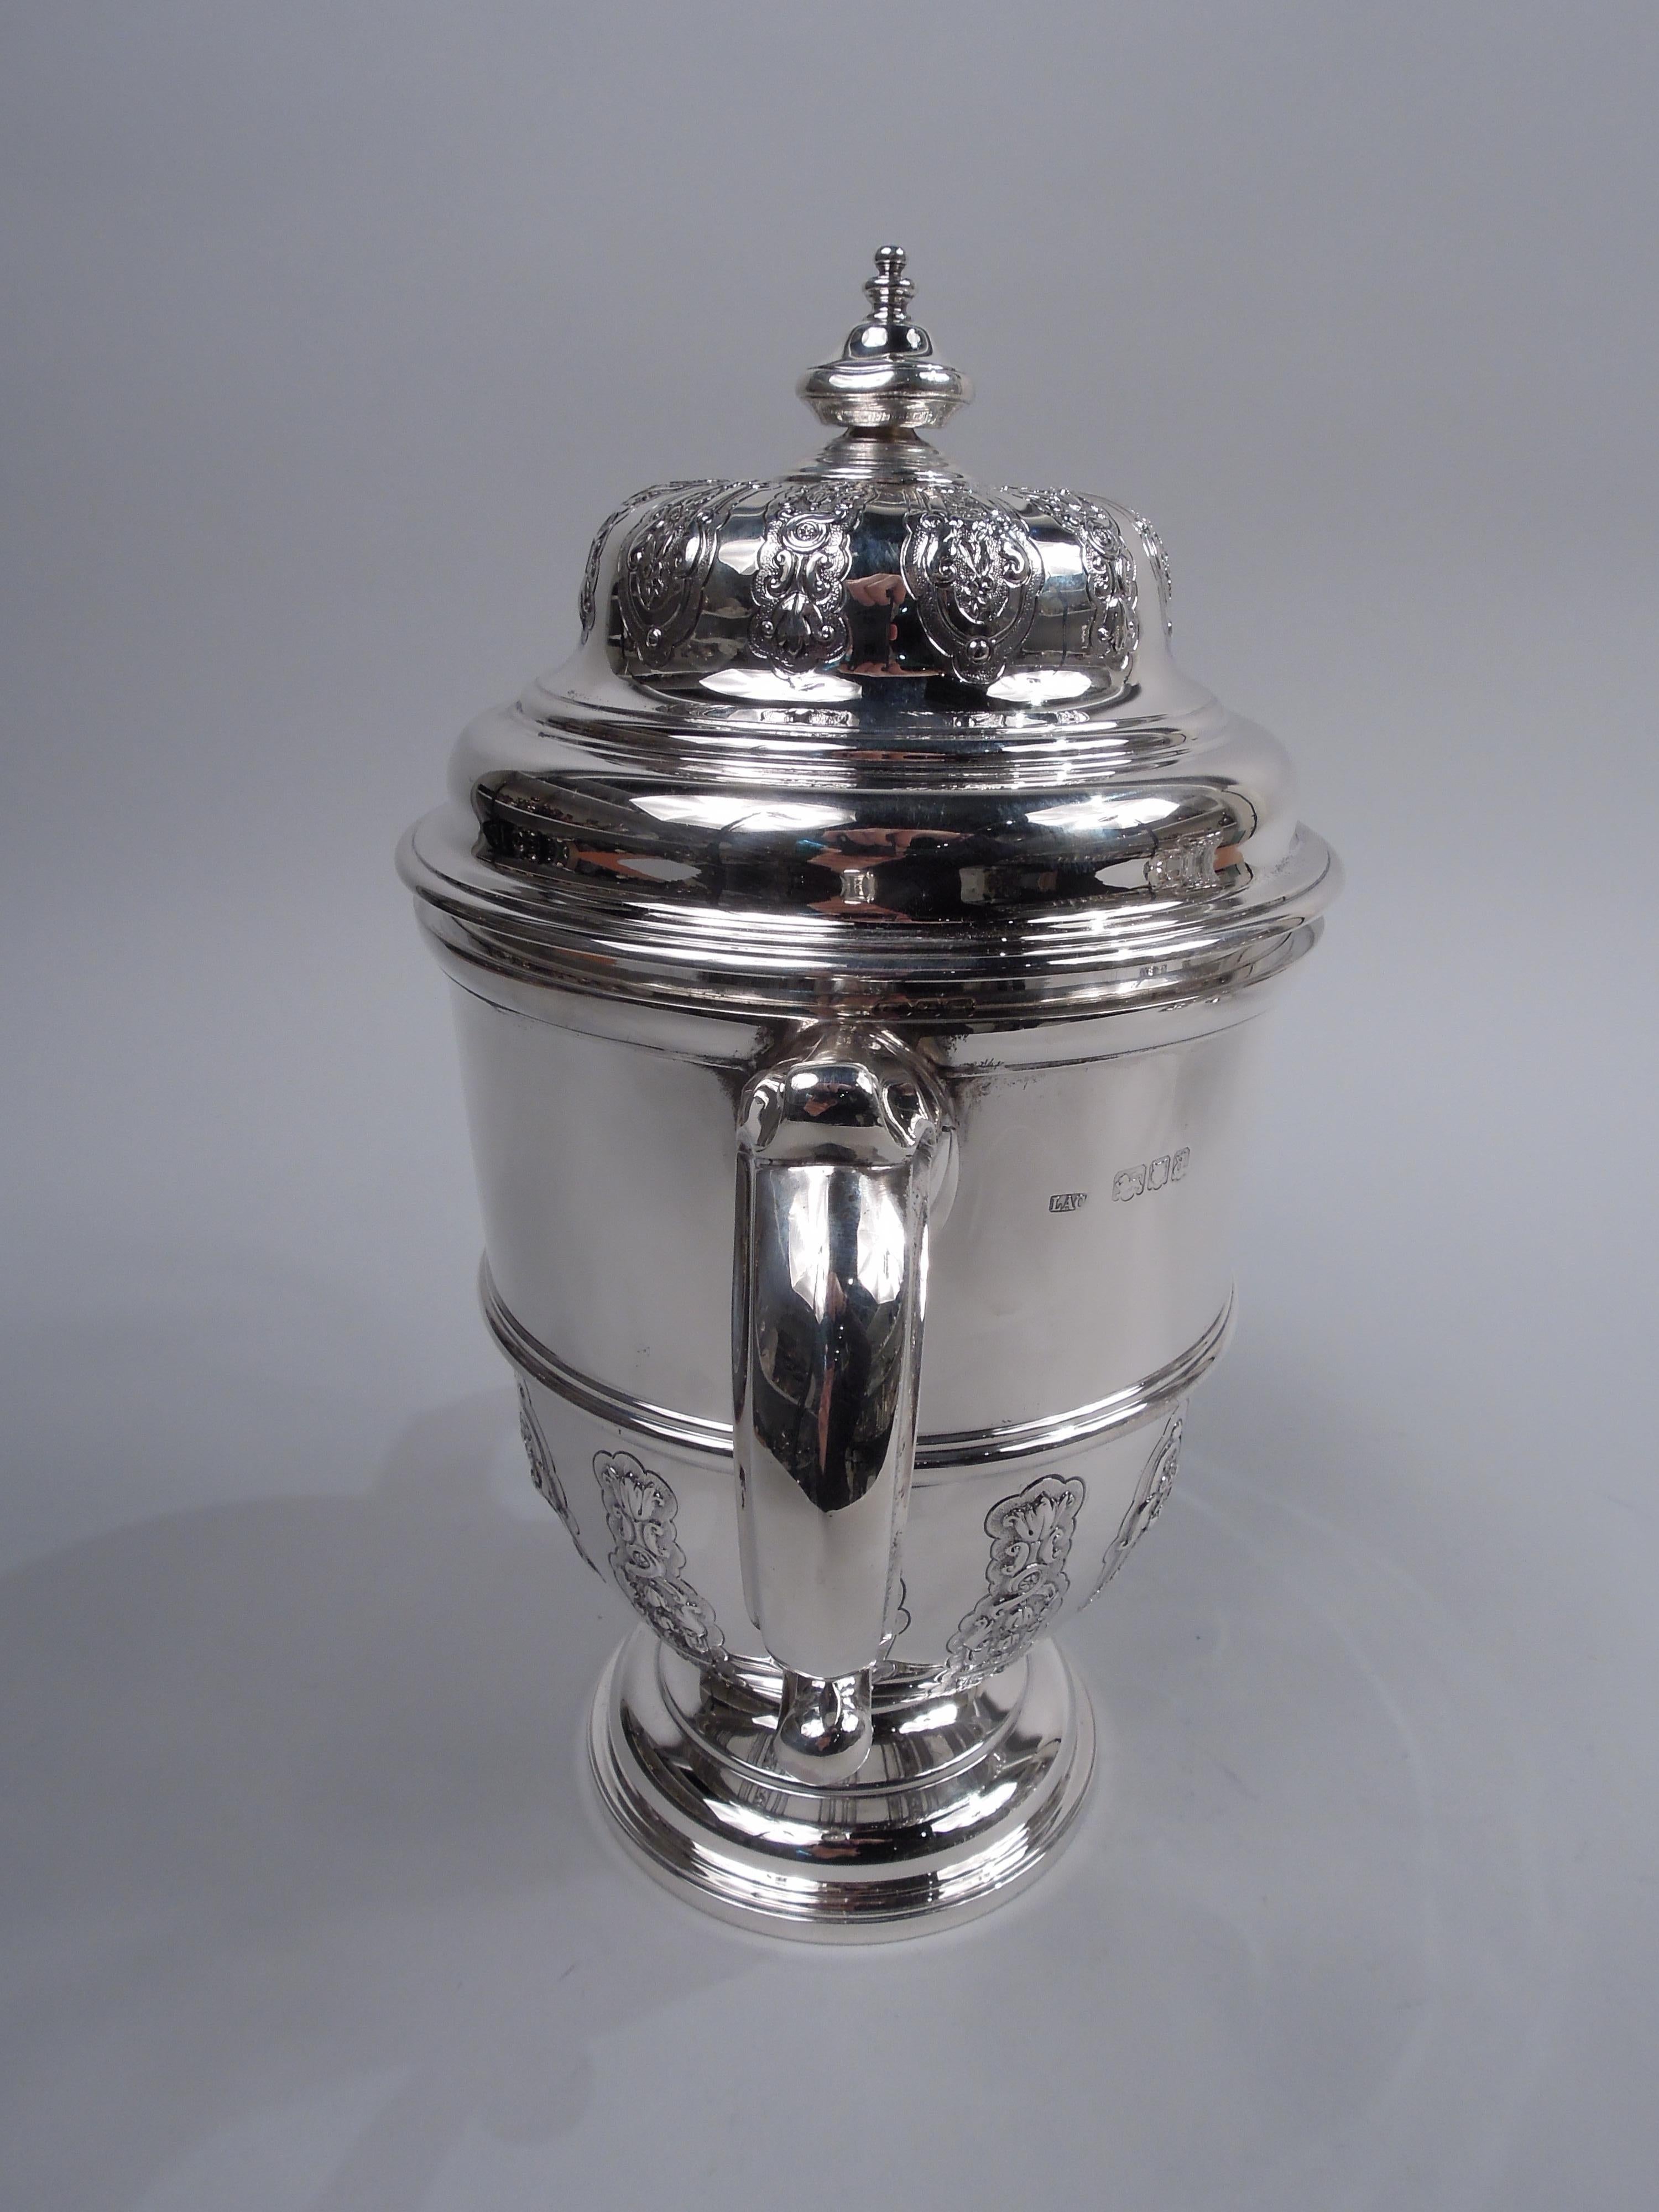 Neoclassical Revival Crichton English Neoclassical Sterling Silver Covered Urn 1916